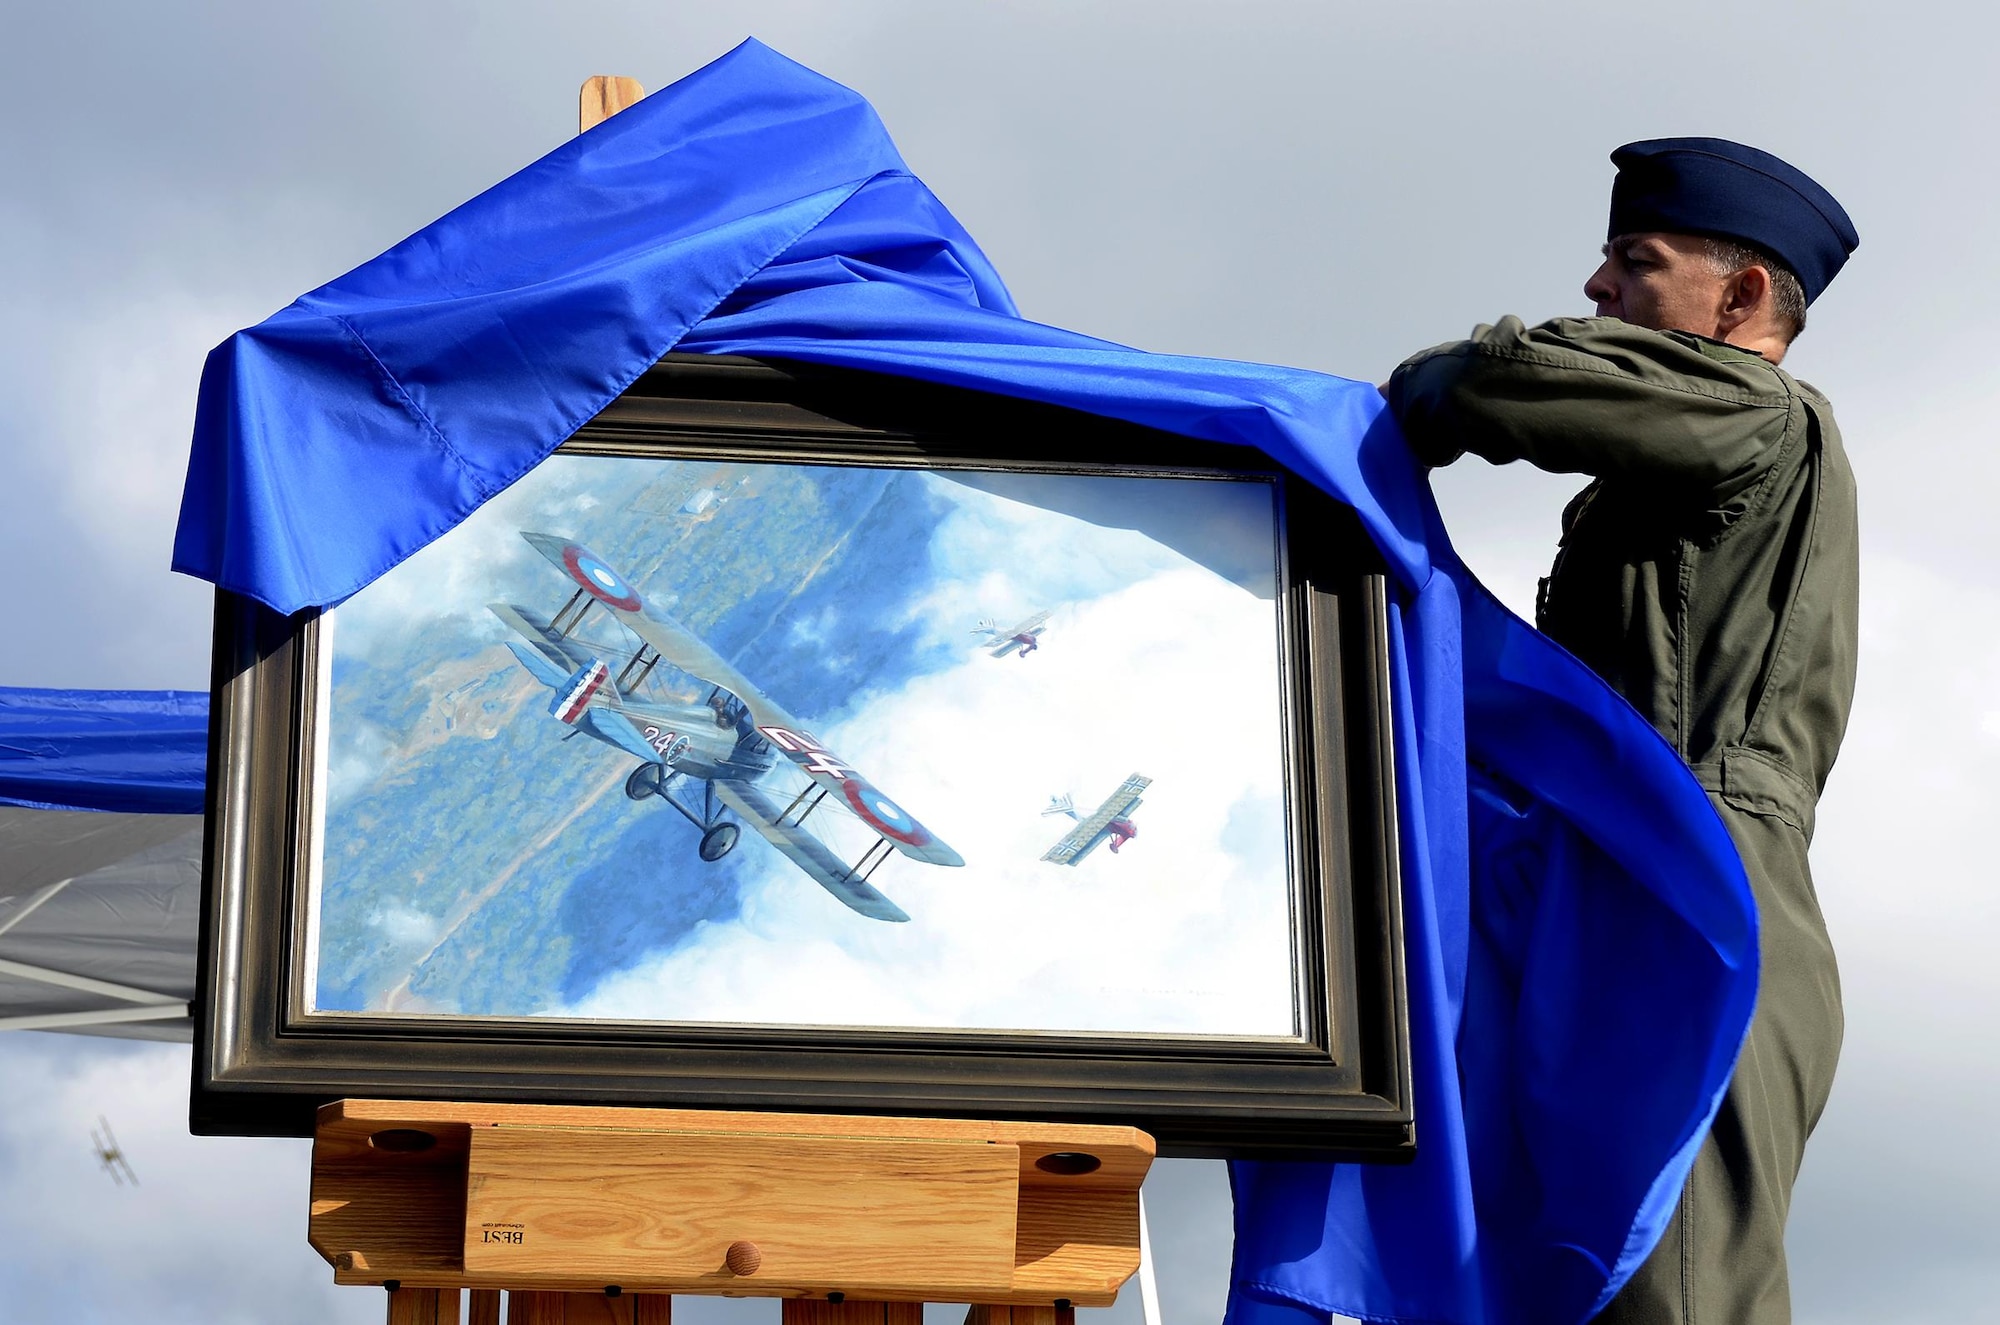 Senior Master Sgt. Darby Perrin, an Air Force artist from the 465th Air Refueling Squadron, Tinker Air Force Base, Oklahoma, unveils his painting at the Dawn Patrol Rendezvous event held at the National Museum of the United States Air Force in Ohio, Oct. 1, 2016. The painting depicts 1st Lt. Charles d’Olive’s victory over three German fighter planes during World War I. (U.S. Air Force photo/Staff Sgt. Joel McCullough)